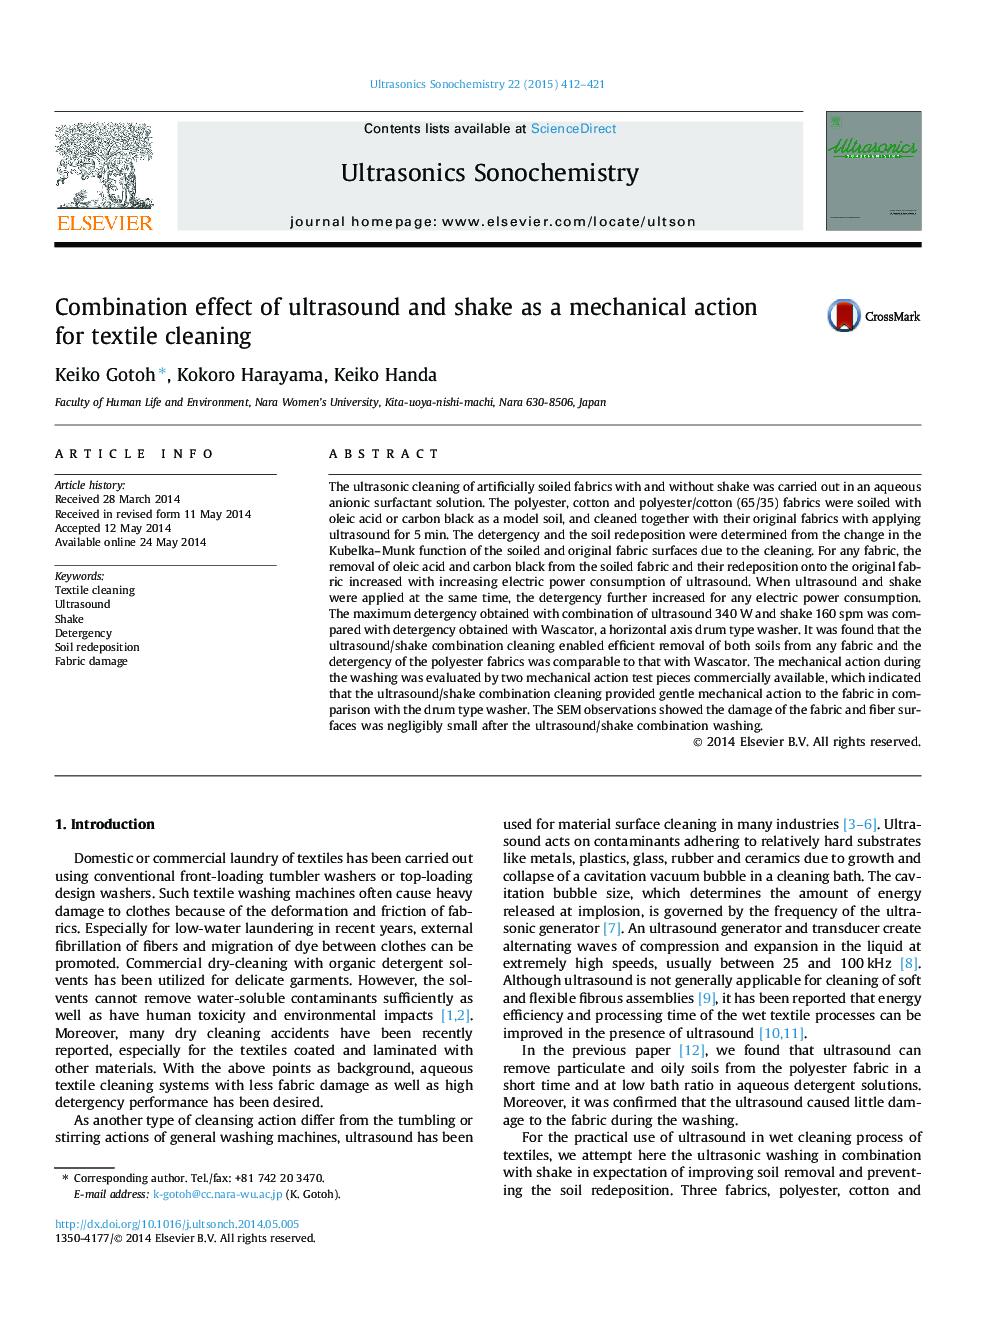 Combination effect of ultrasound and shake as a mechanical action for textile cleaning